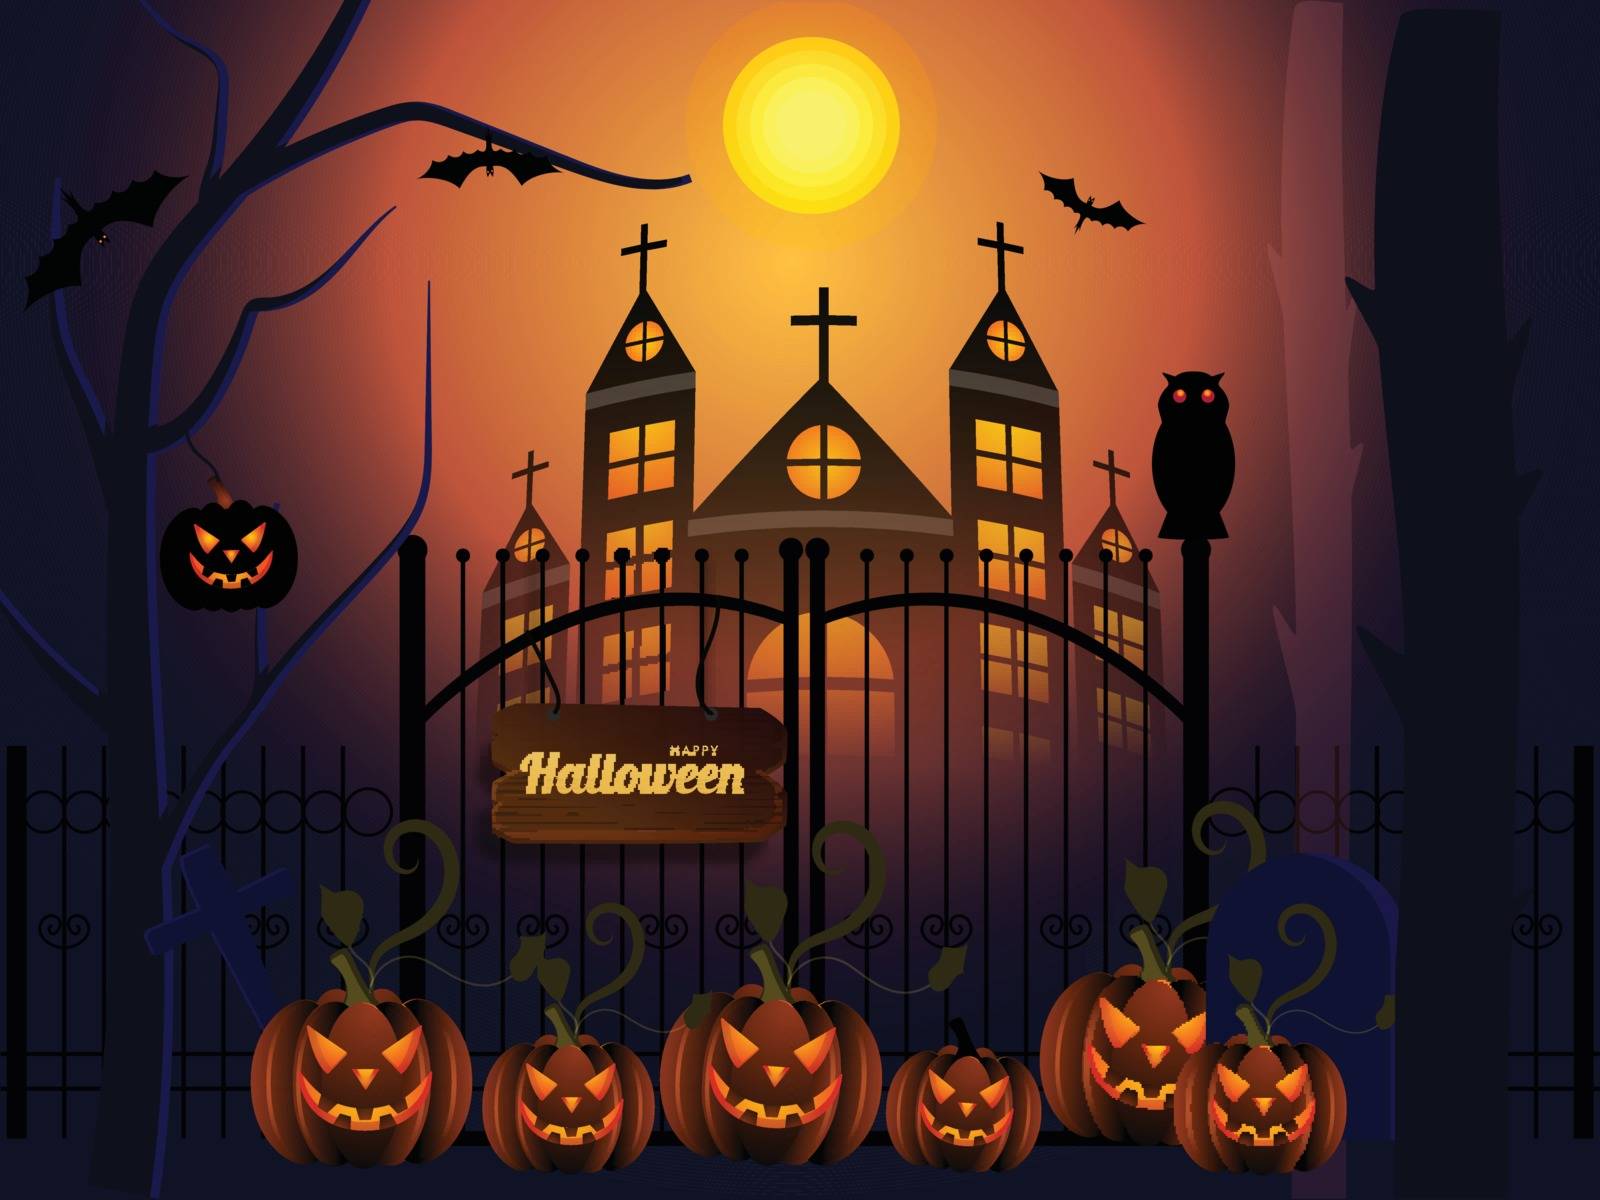 Halloween full moon night background with scary jack-o-lanterns and haunted house illustration.